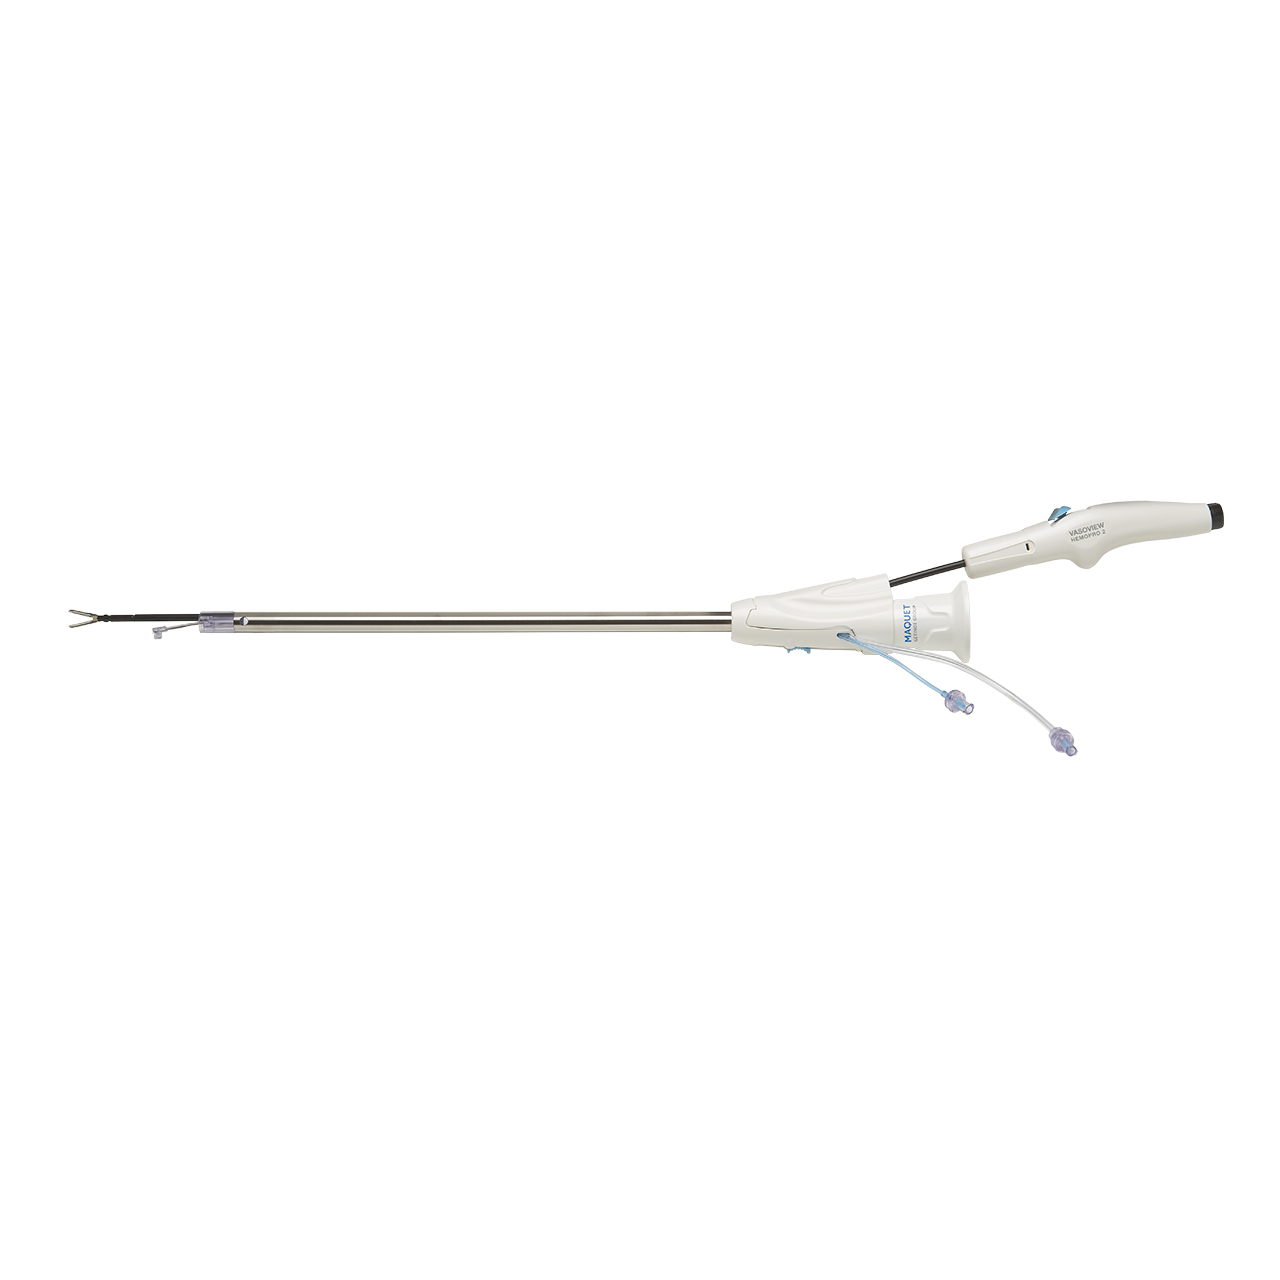 Vasoview Hemopro 2 Endoscopic Vessel Harvesting System is the latest generation of simultaneous cut and seal technology